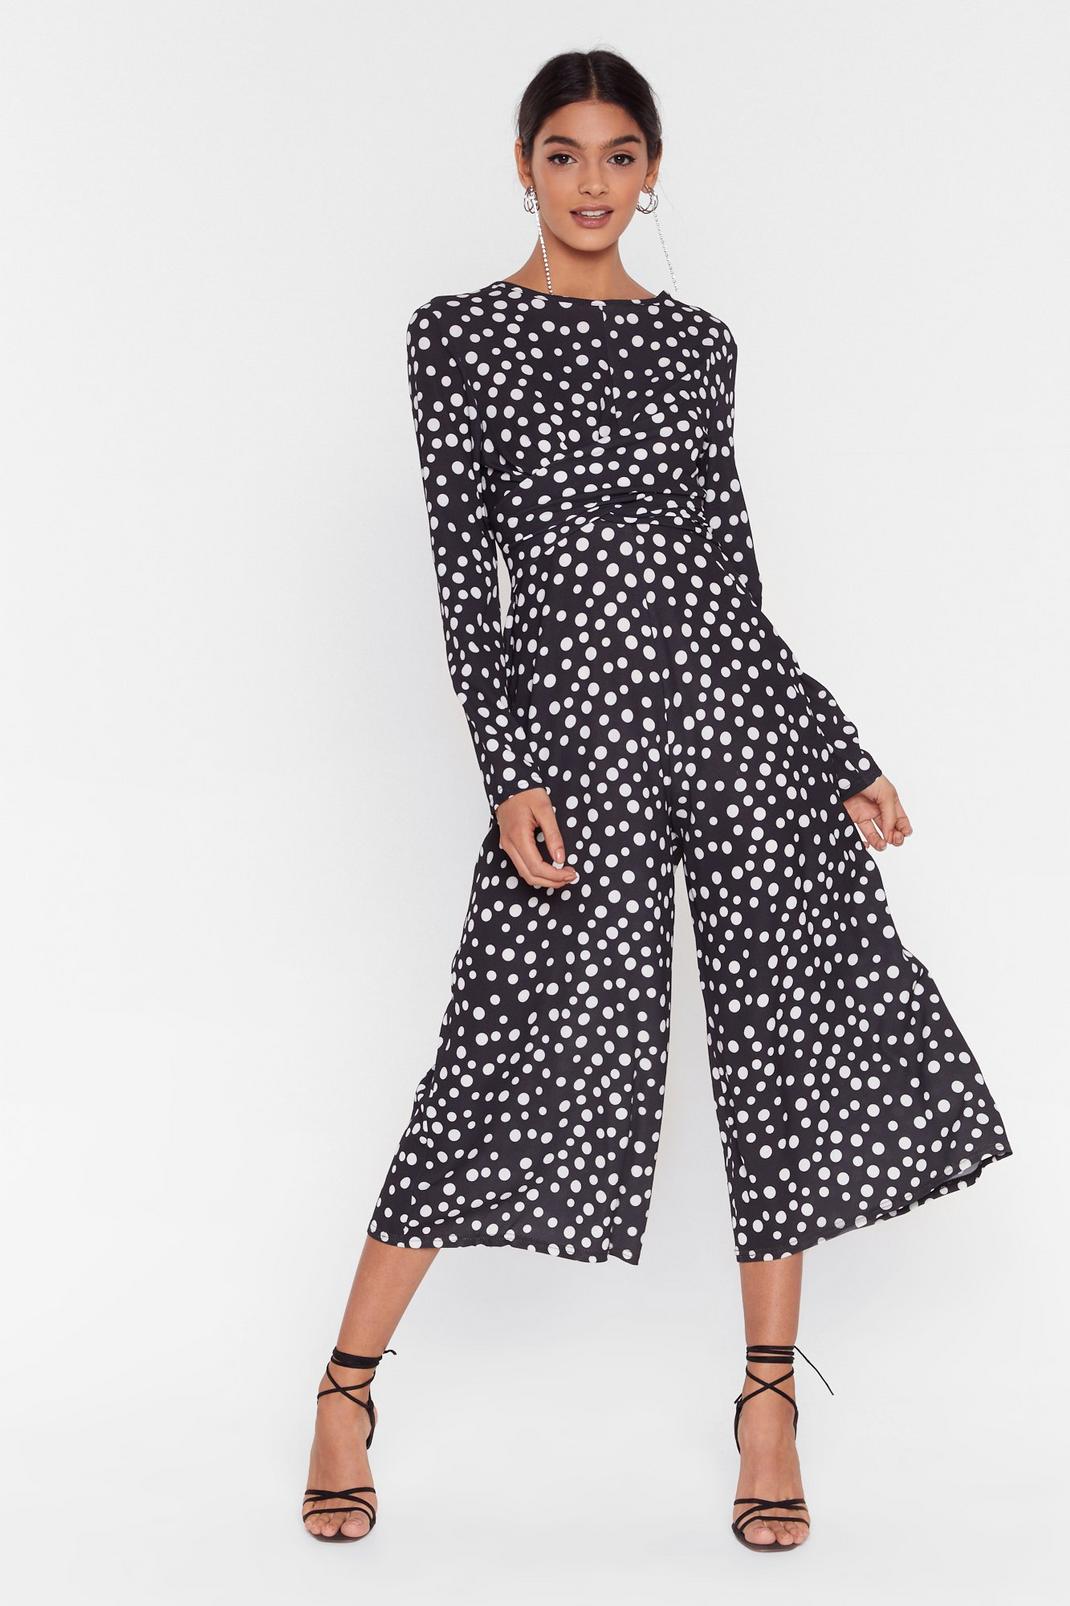 Dot Ready to Go Polka Dot Jumpsuit image number 1